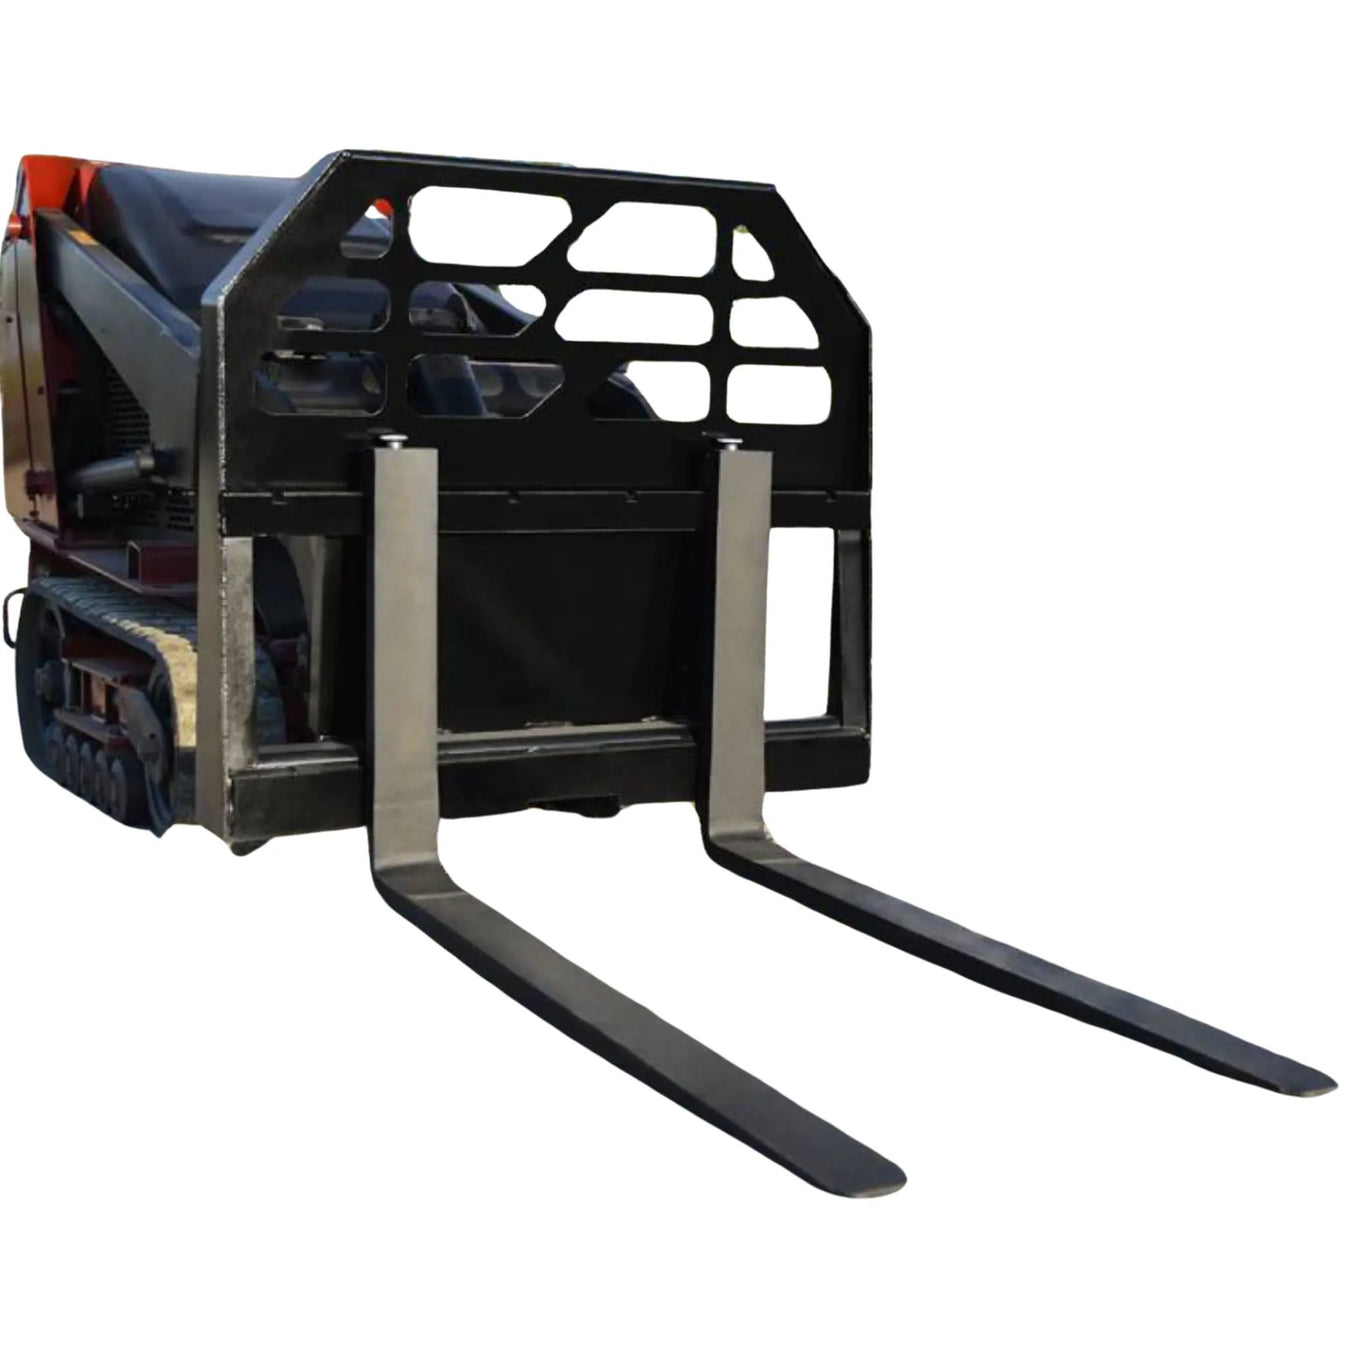 Loflin Fabrication Pallet Forks - Attachments King